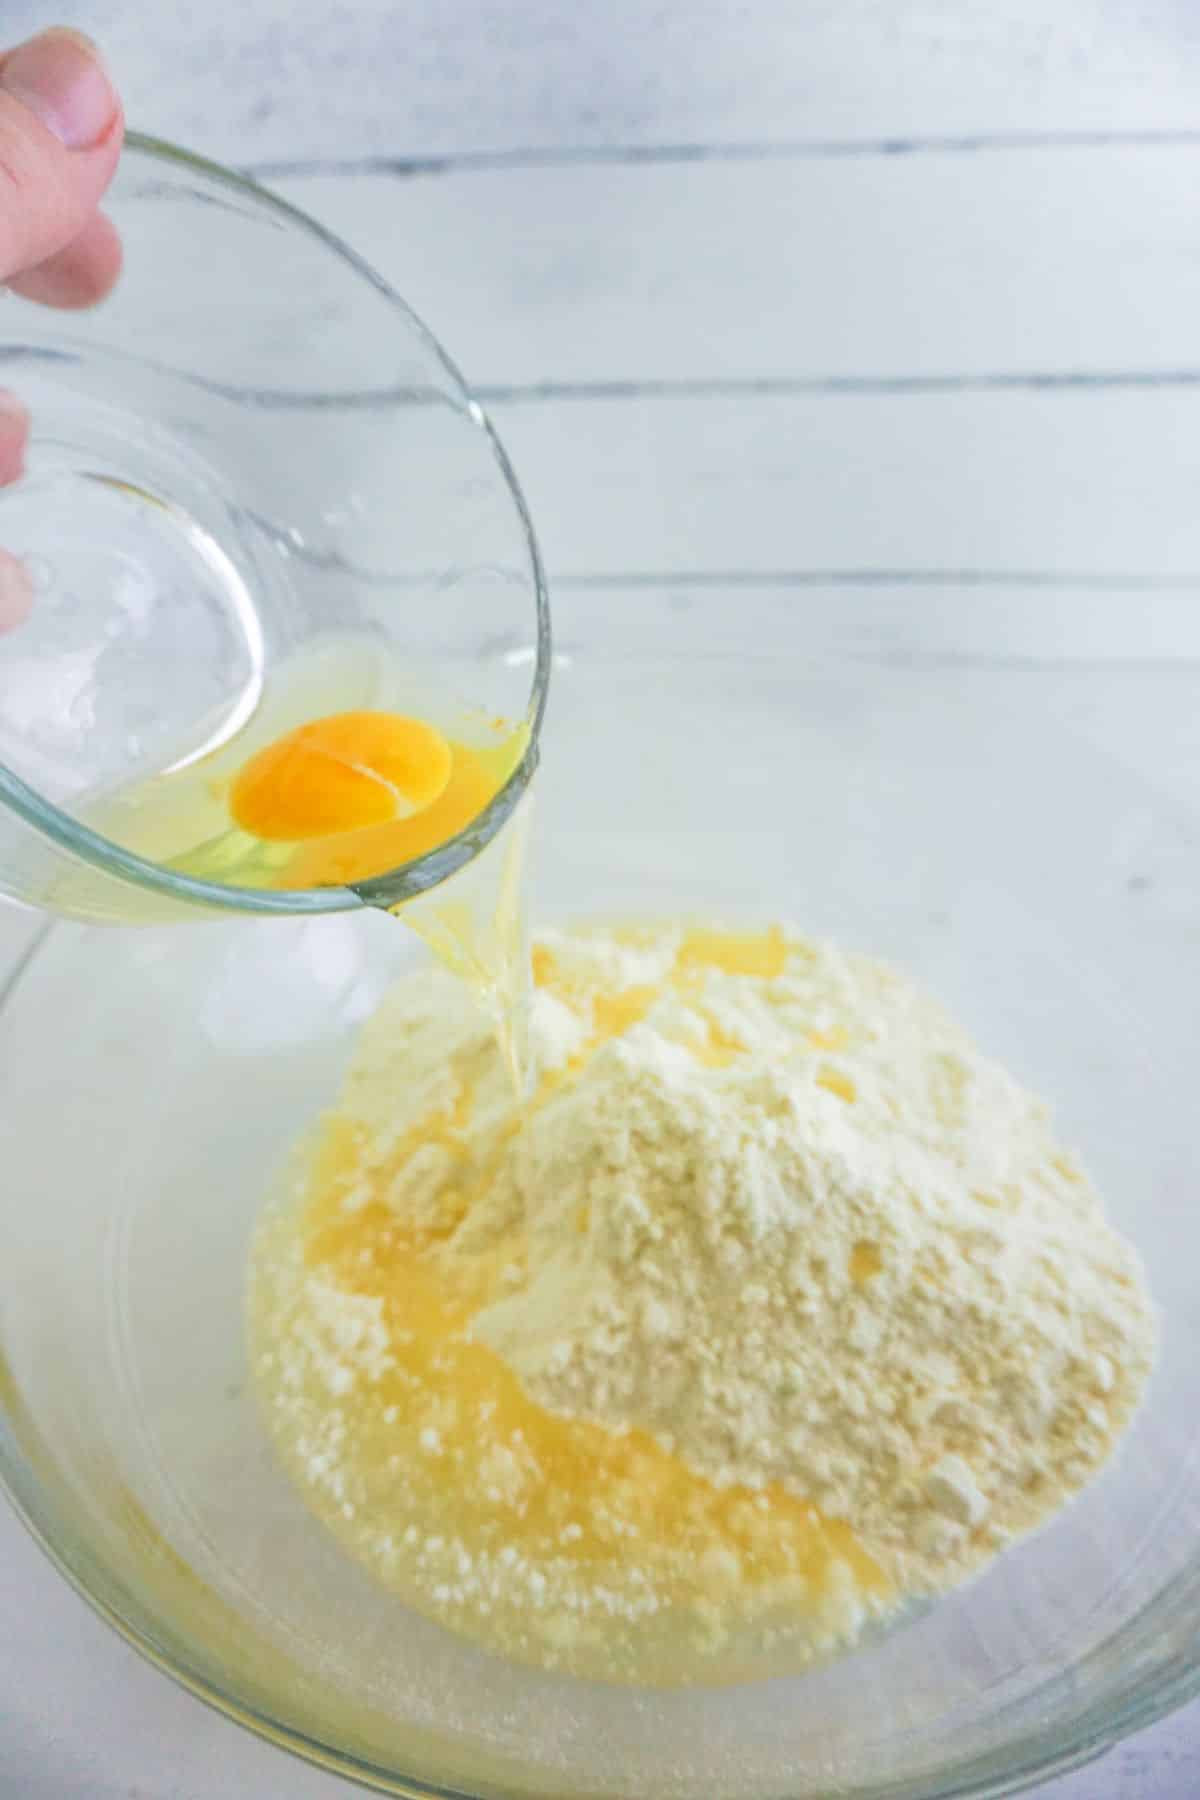 eggs being poured from a glass bowl into cake mix in another glass bowl